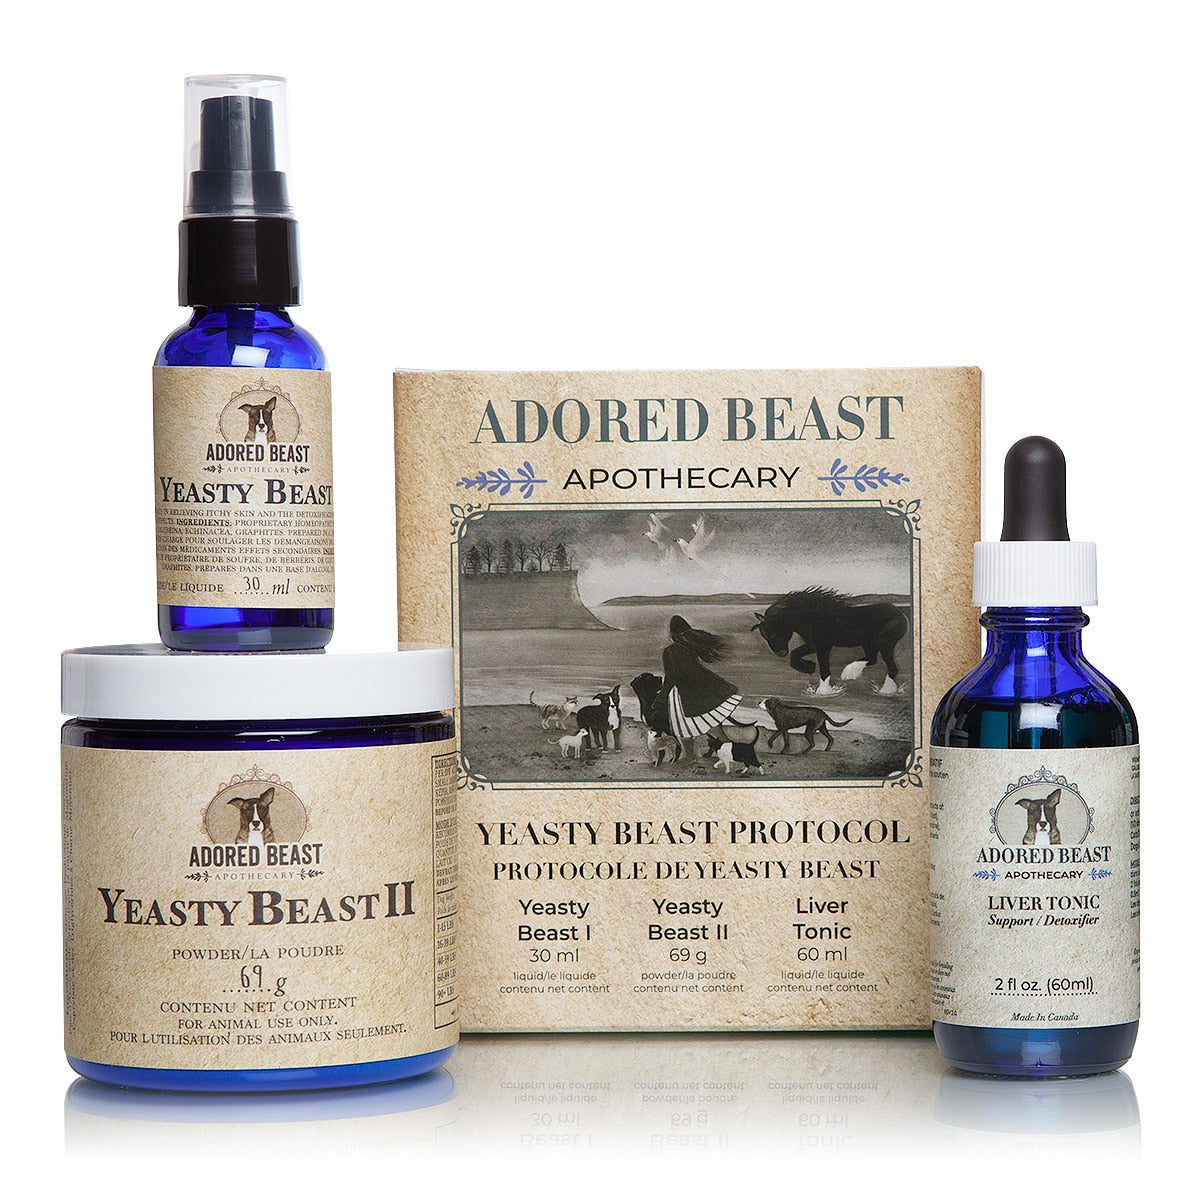 Yeasty Beast Protocol for Dogs - 3 product kit